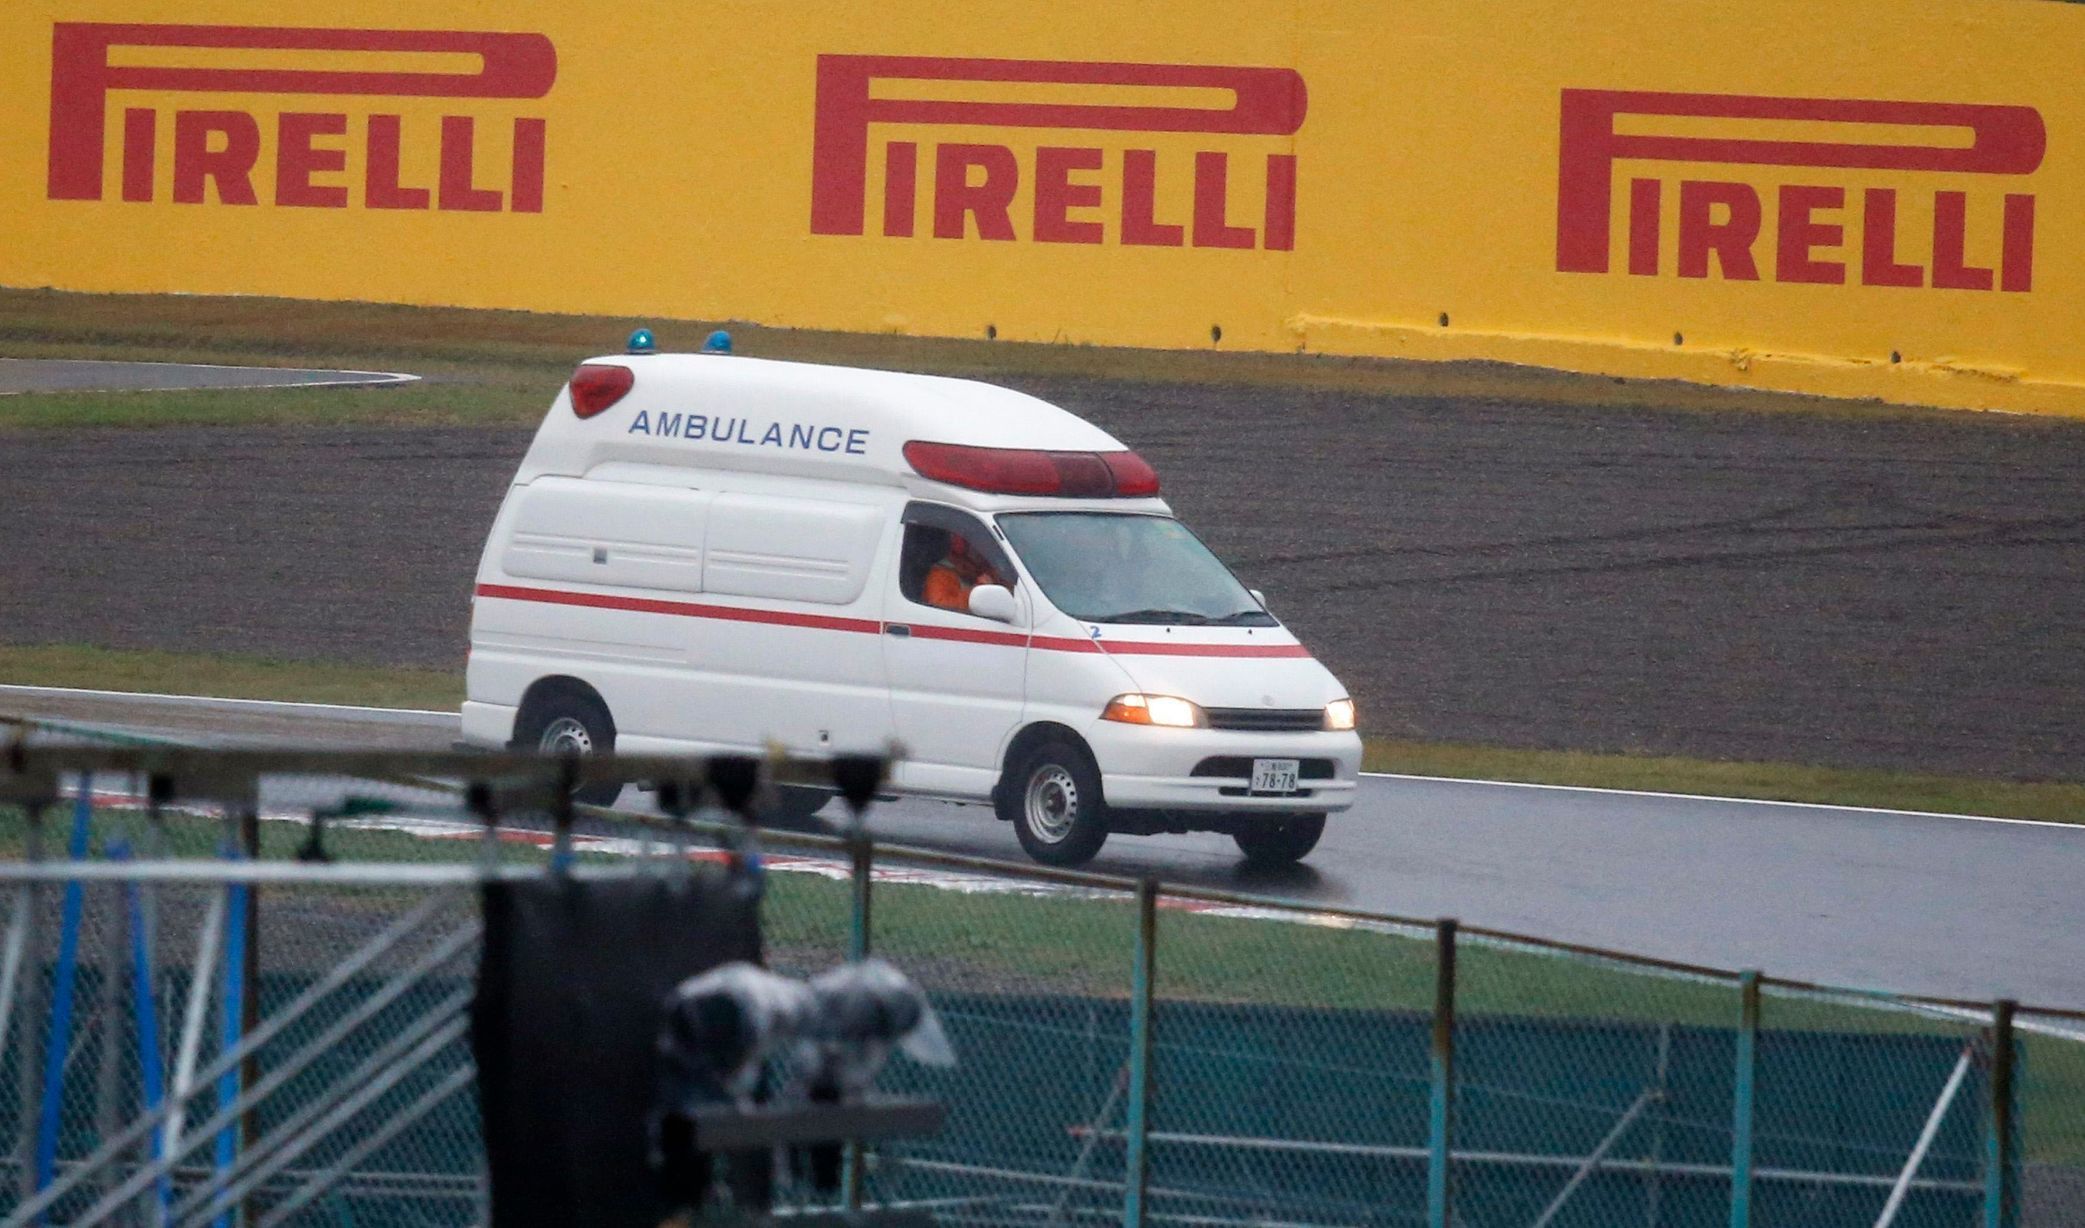 An ambulance is dispatched after the race was stopped following a crash by Marussia Formula One driver Jules Bianchi of France at the Japanese F1 Grand Prix at the Suzuka Circuit